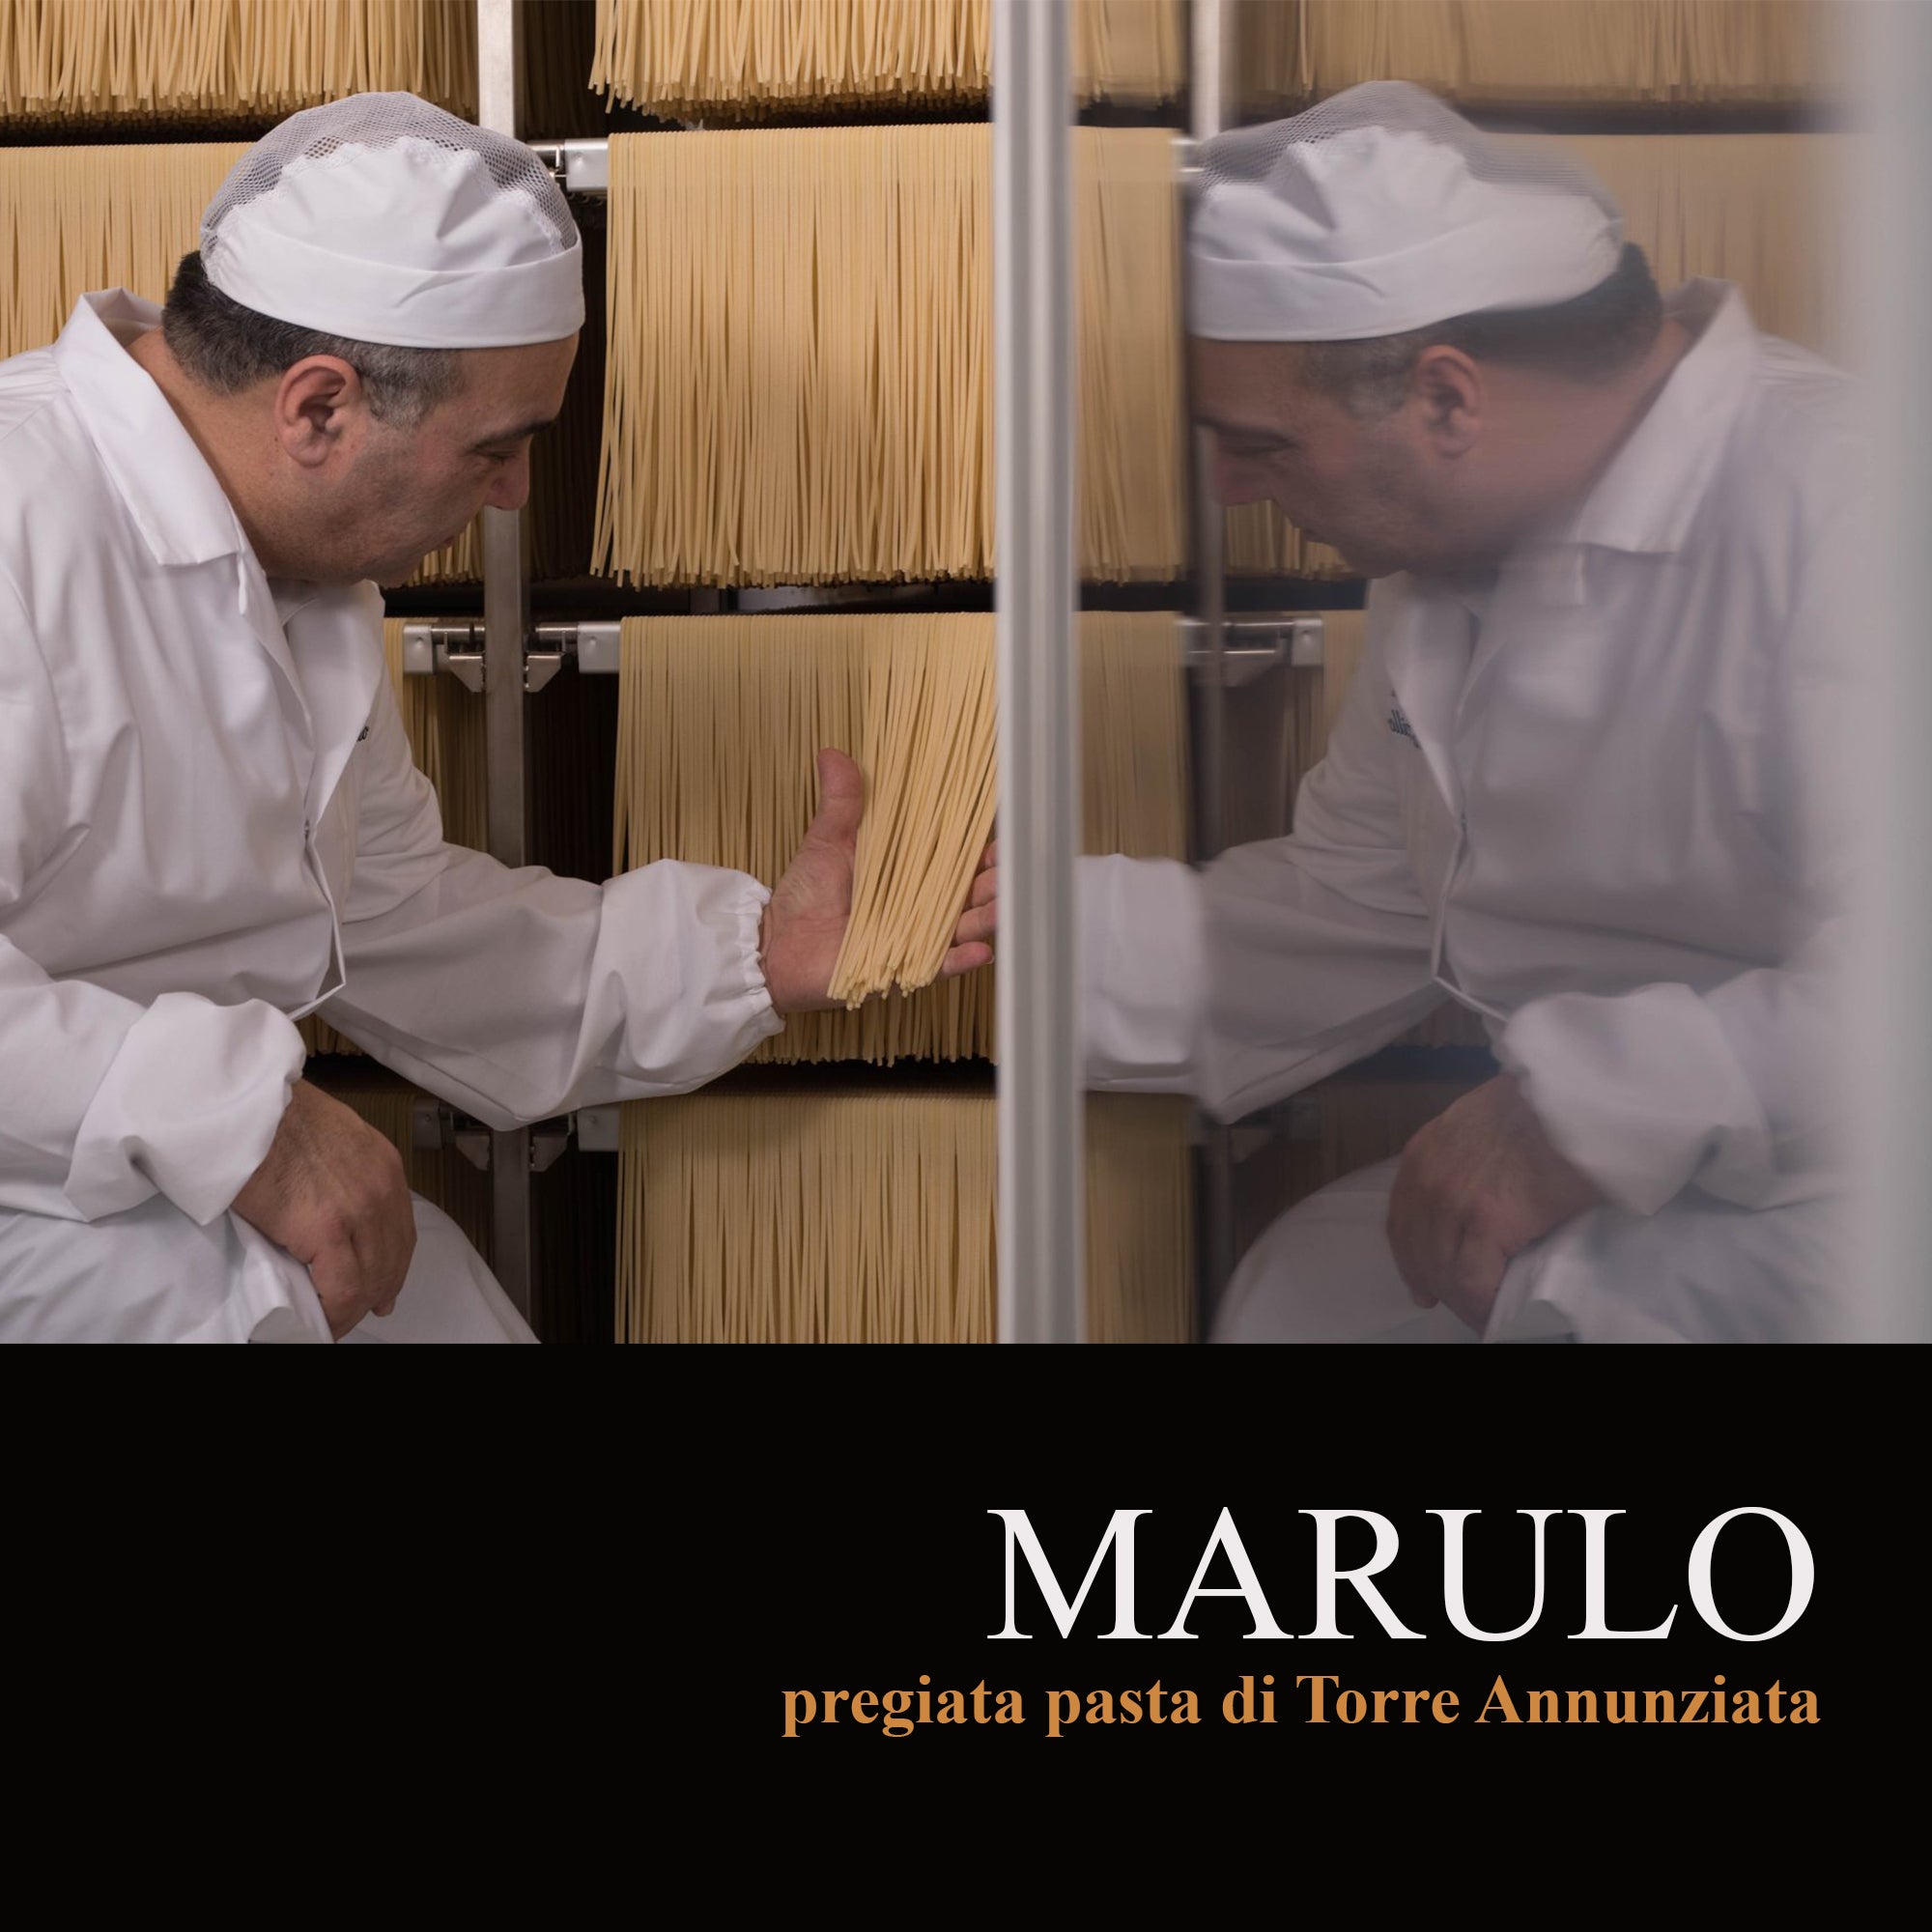 How the Marulo Artisan Pasta Gift Set is made | Homemade Italian Pasta By Artisan Chefs |  8 Pack Artisan Gift Set 